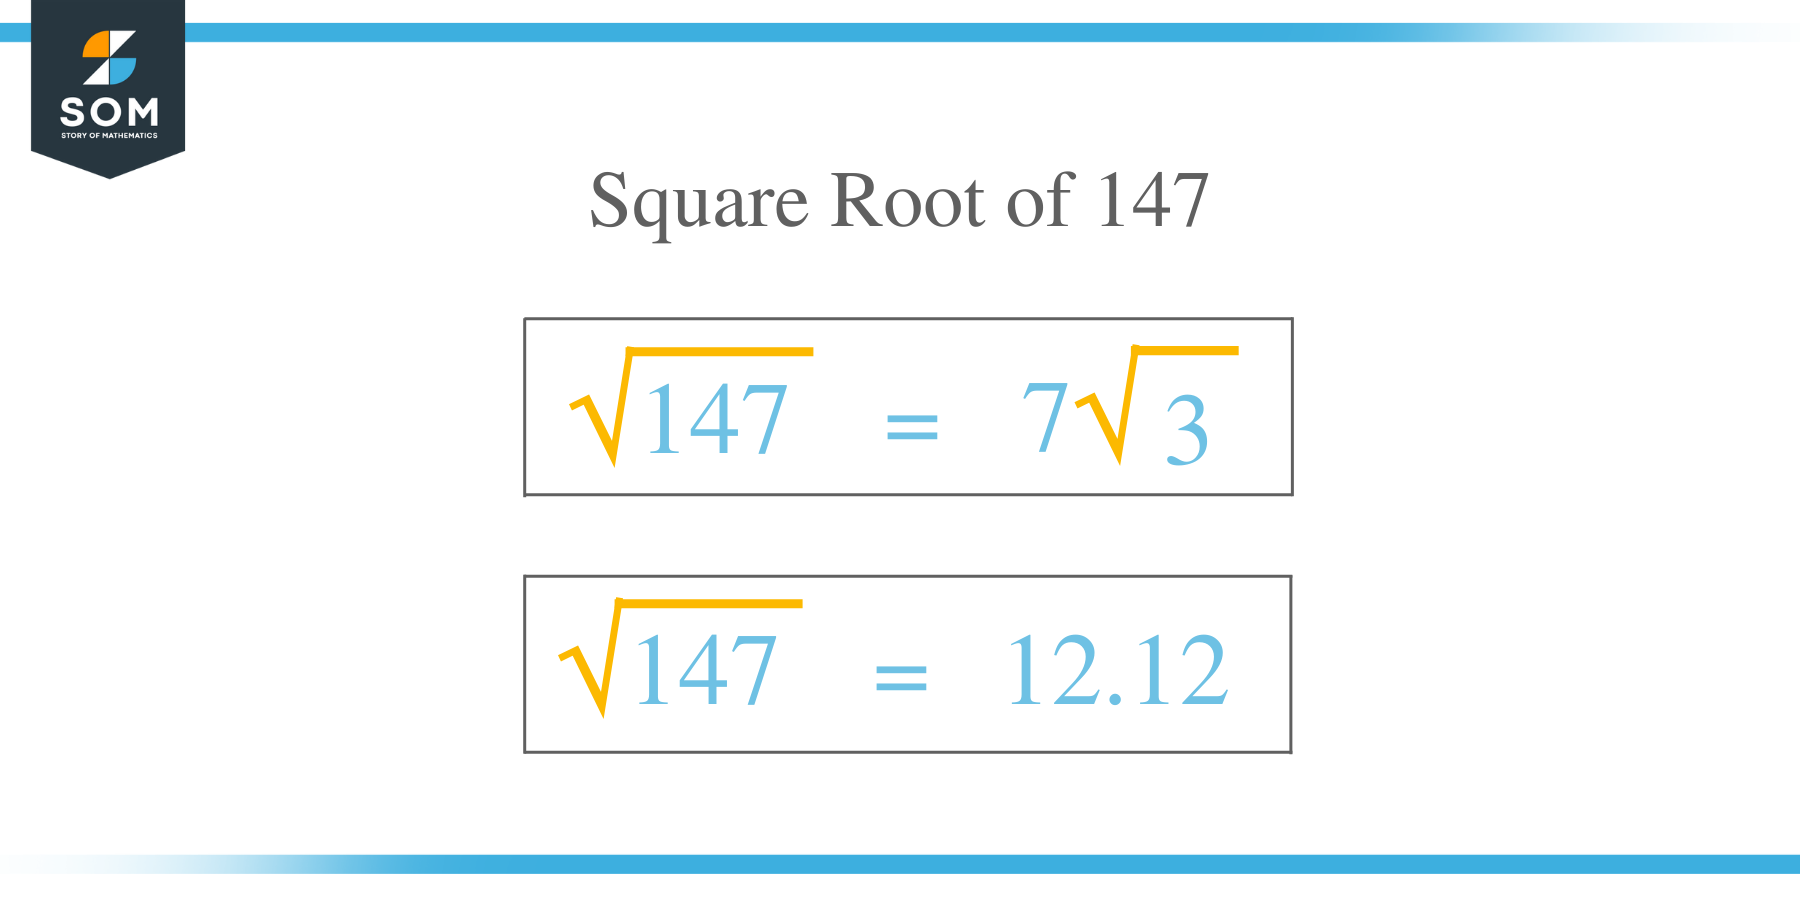 Square Root of 147